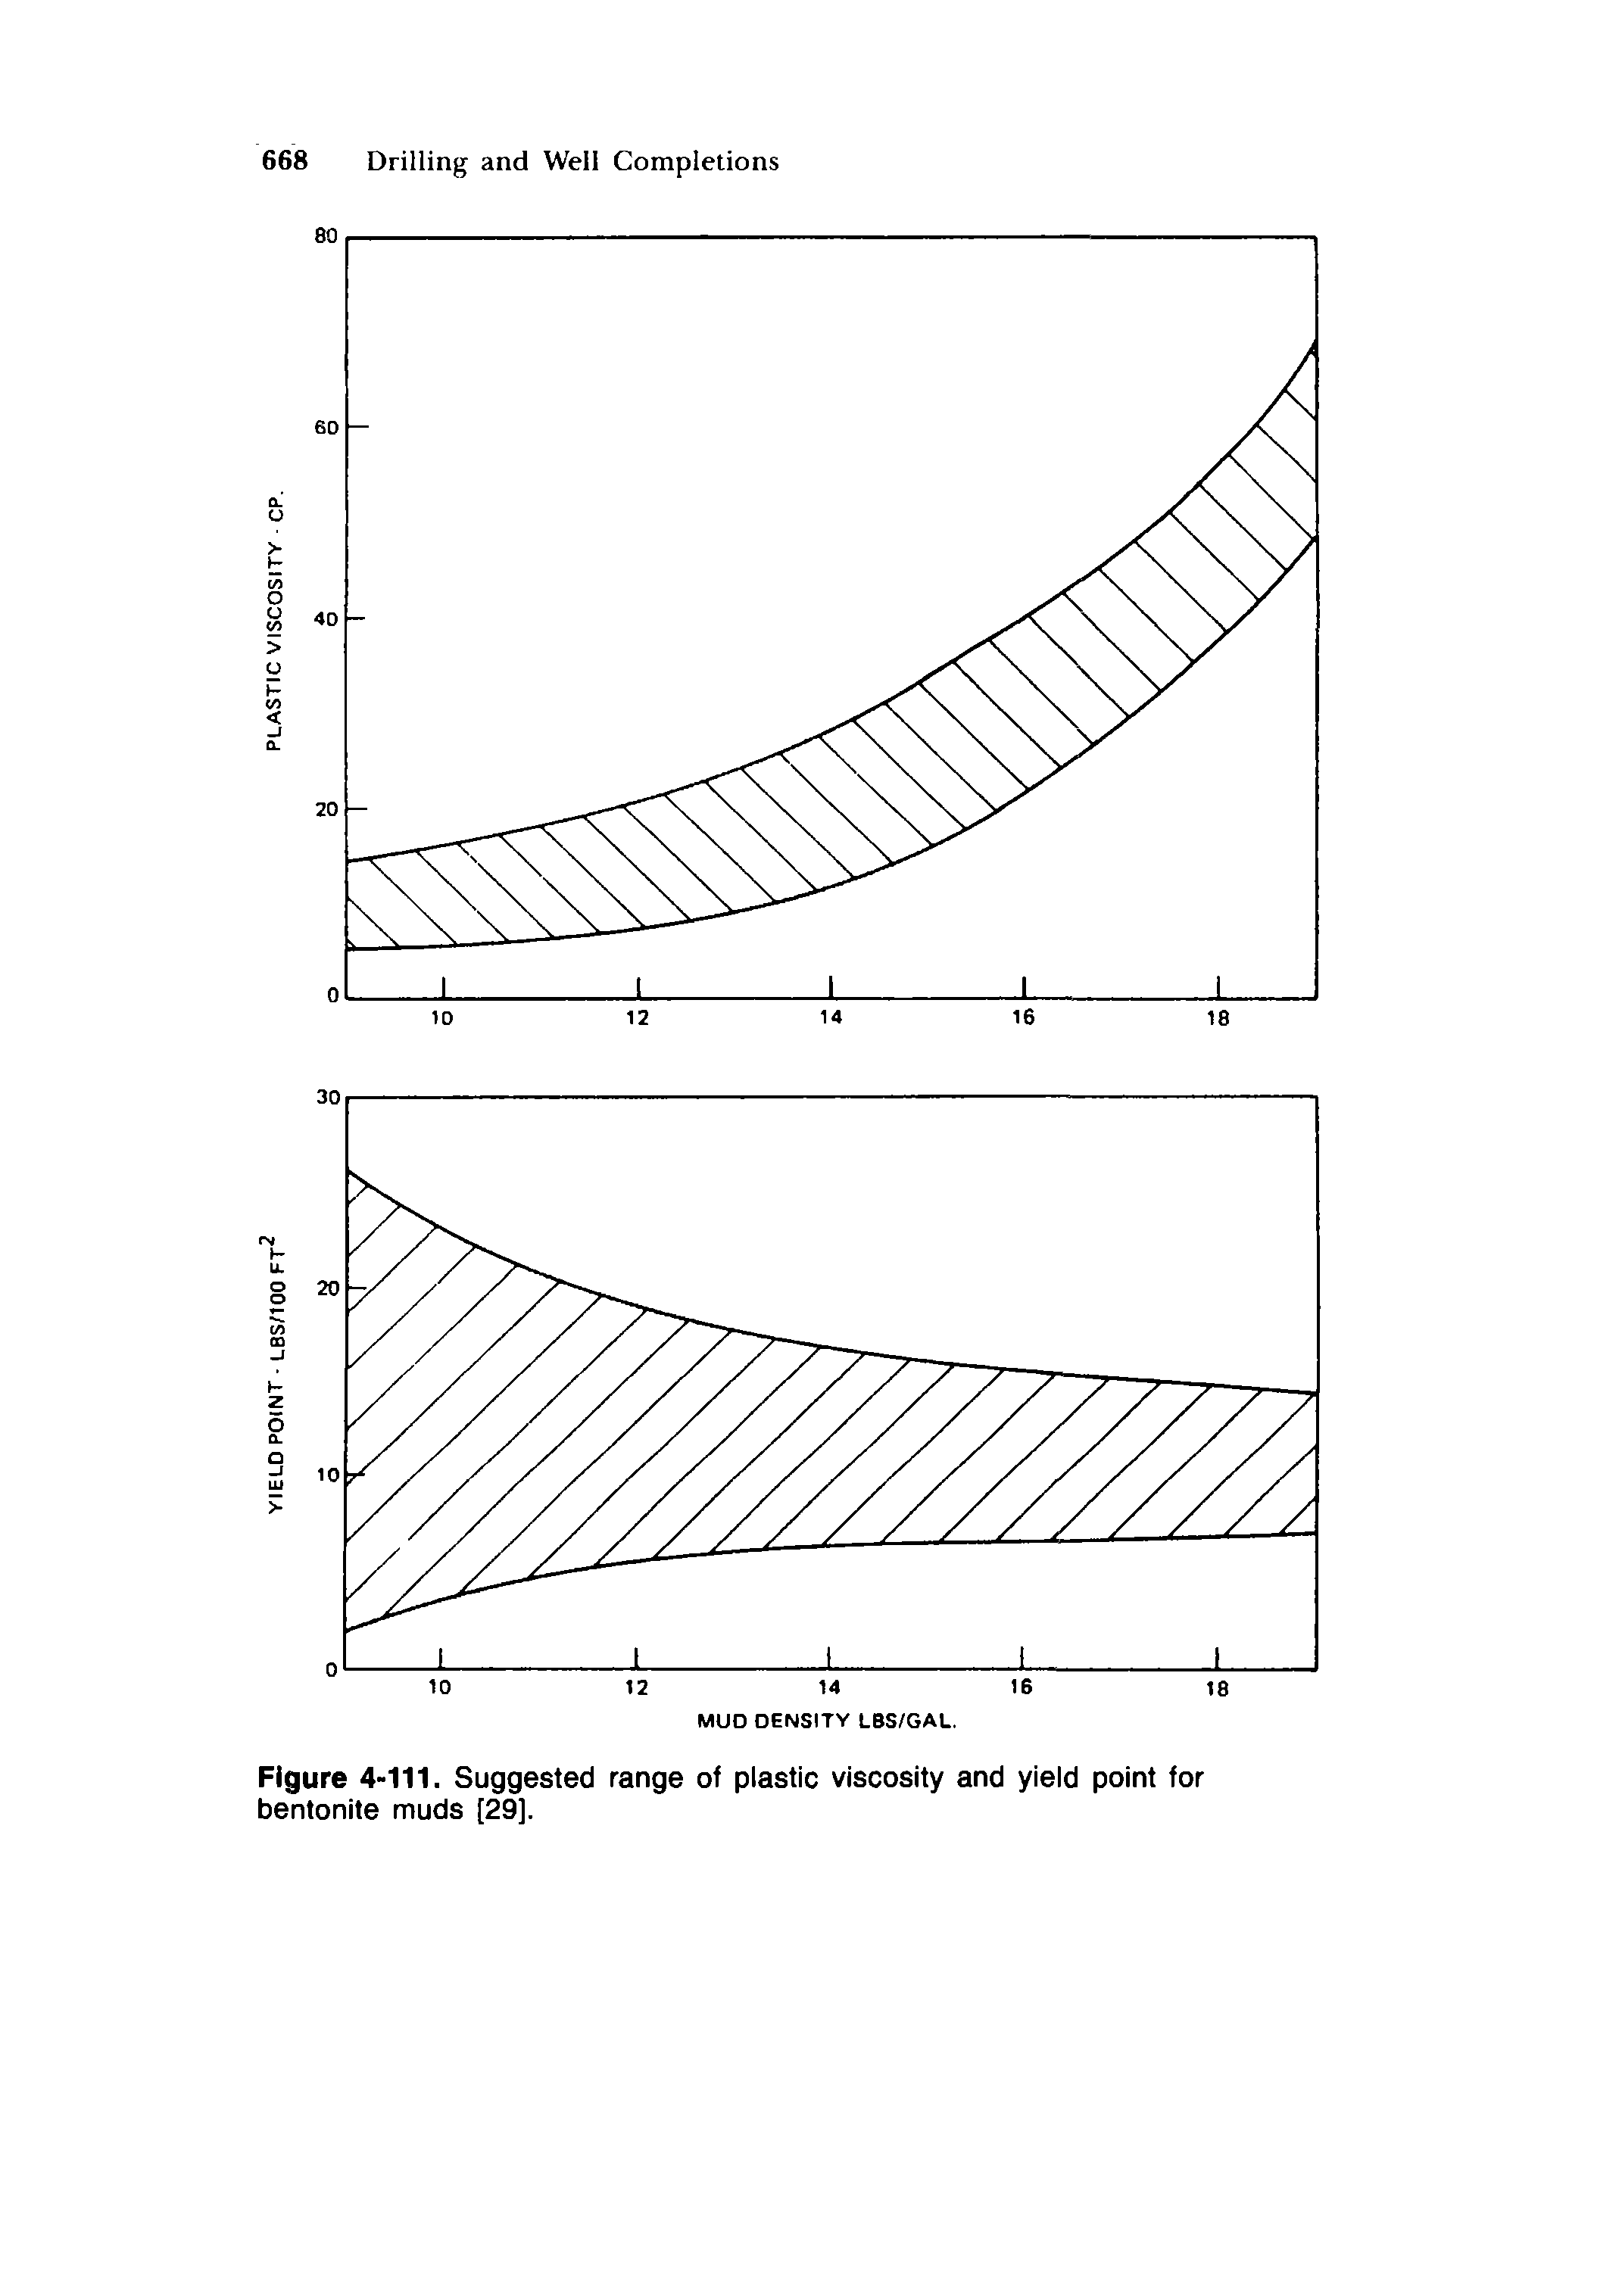 Figure 4-111. Suggested range of plastic viscosity and yield point for bentonite muds [29],...